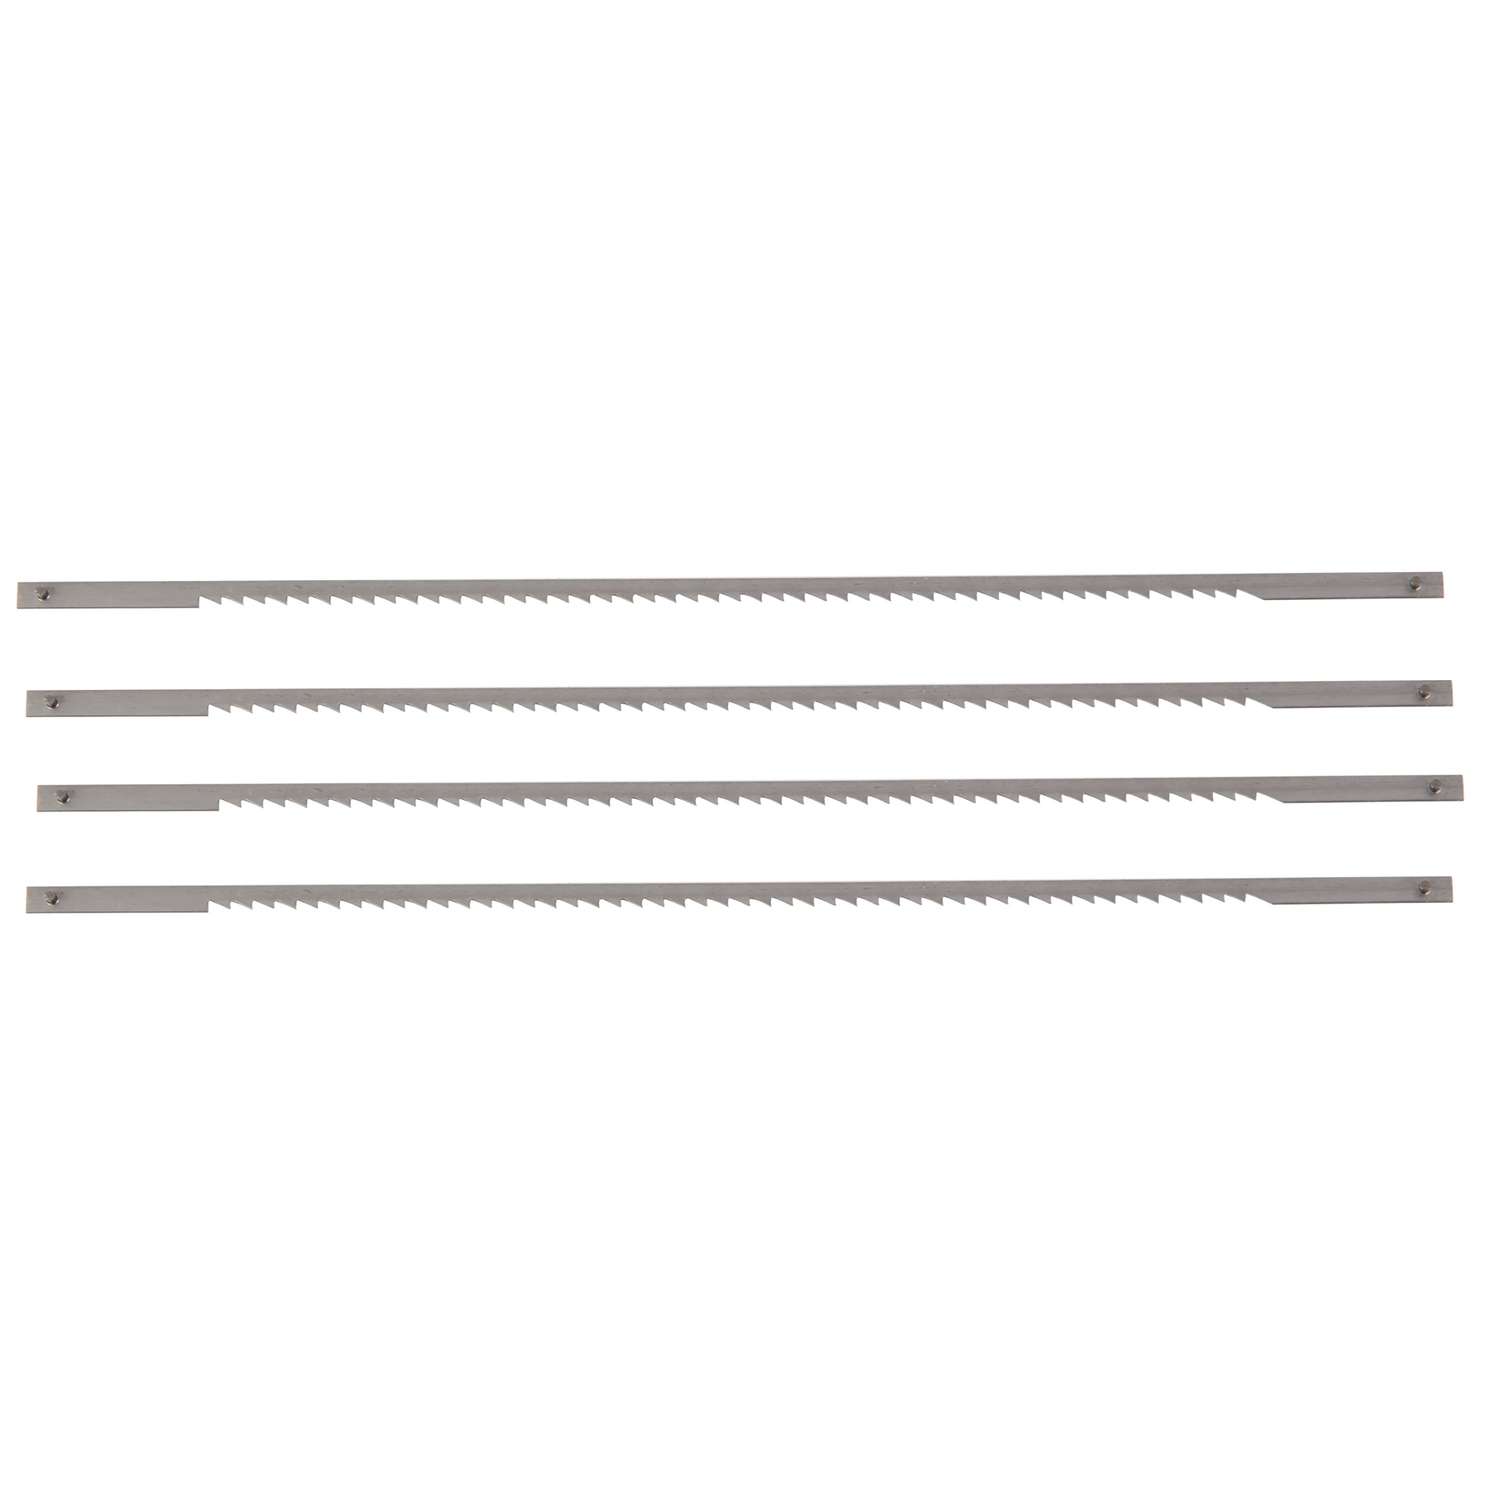 Stanley Coping Saw Blade 10 TPI - 4 Pack 15-058